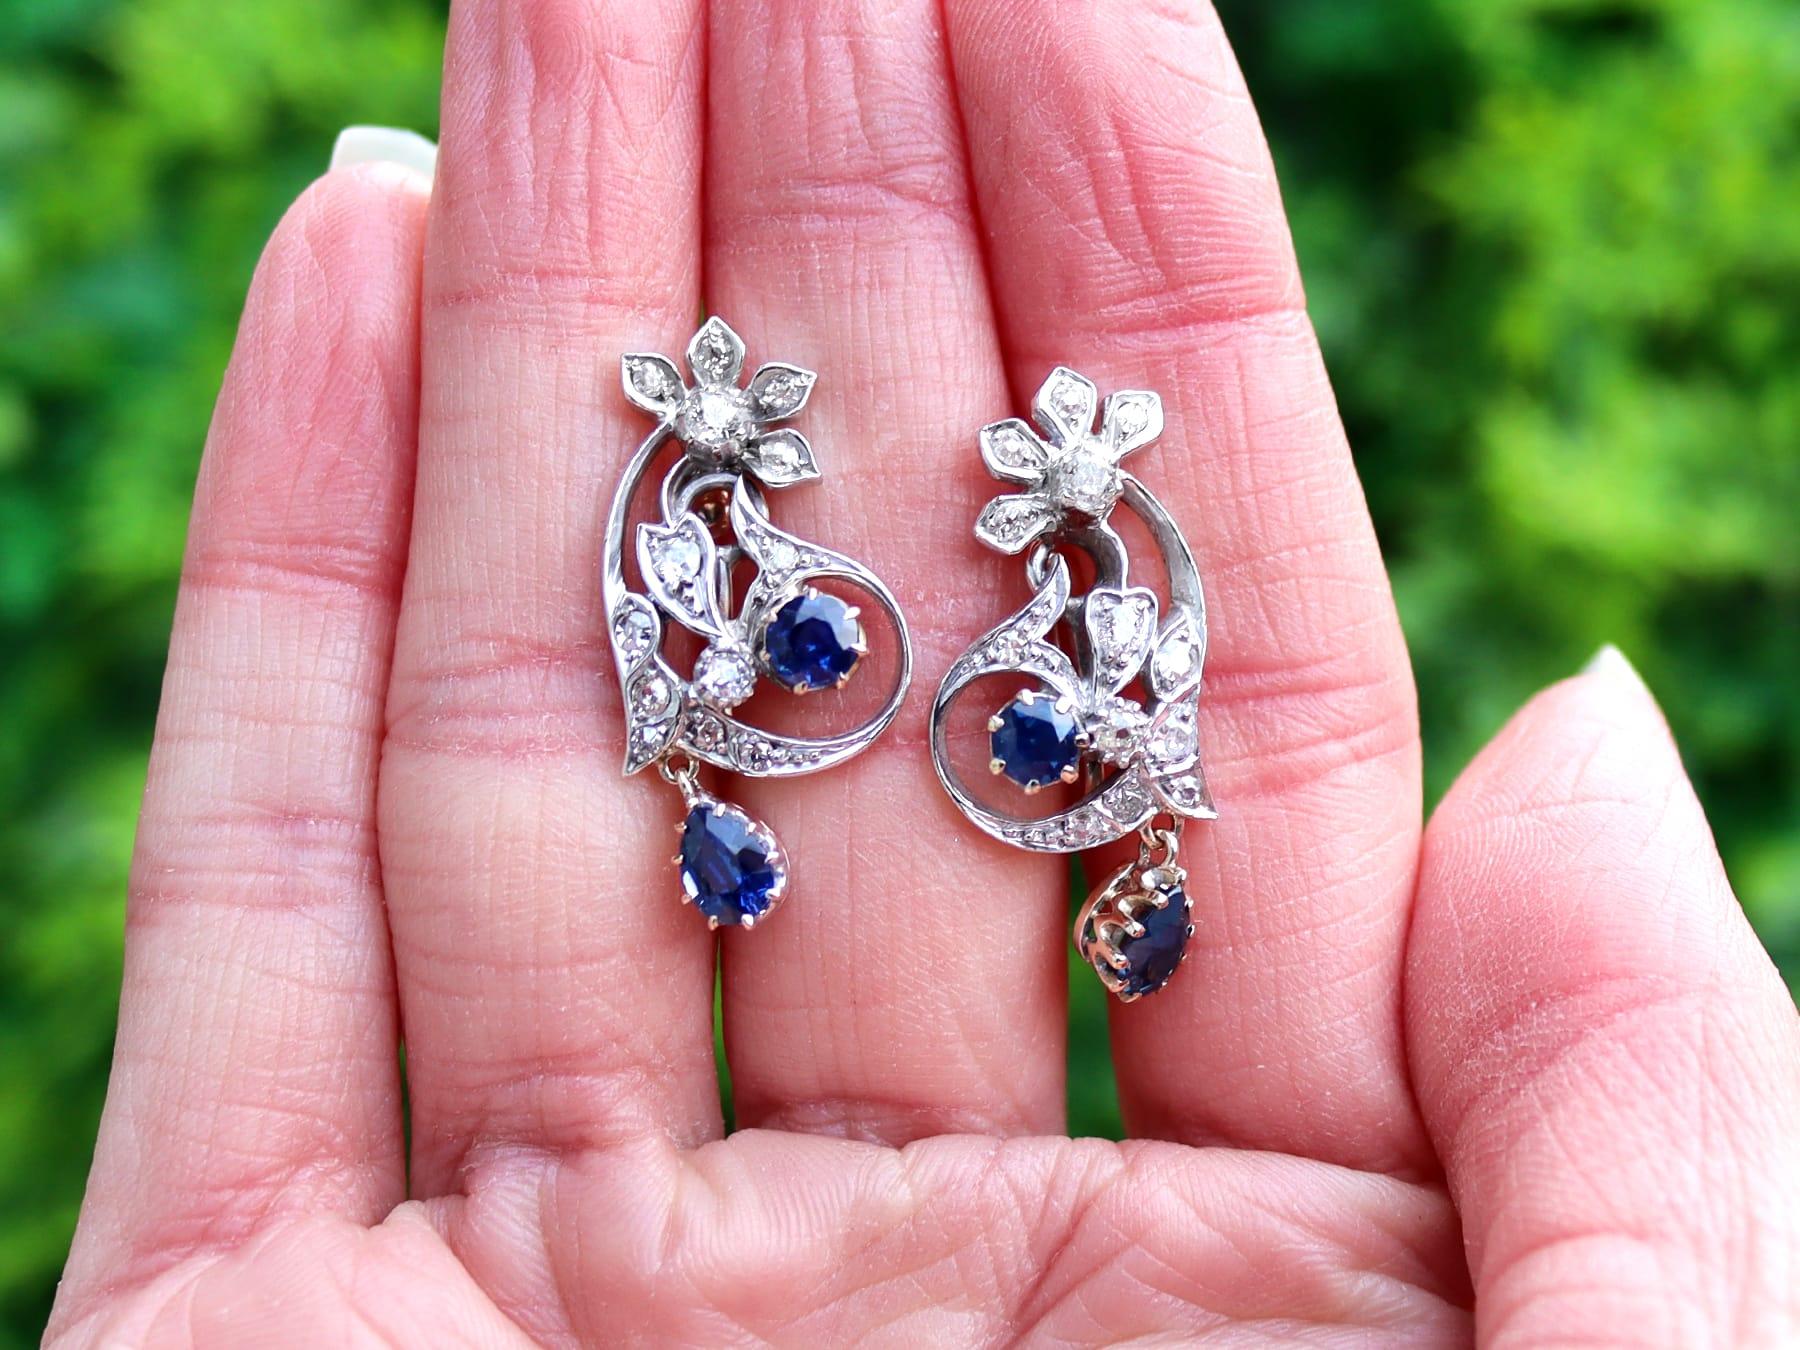 A fine and impressive pair of 1.56 carat sapphire and 1.20 carat diamond, 9 karat yellow gold and silver set earrings; part of our diverse antique floral jewellery collections.

These fine and impressive antique sapphire earrings have been crafted